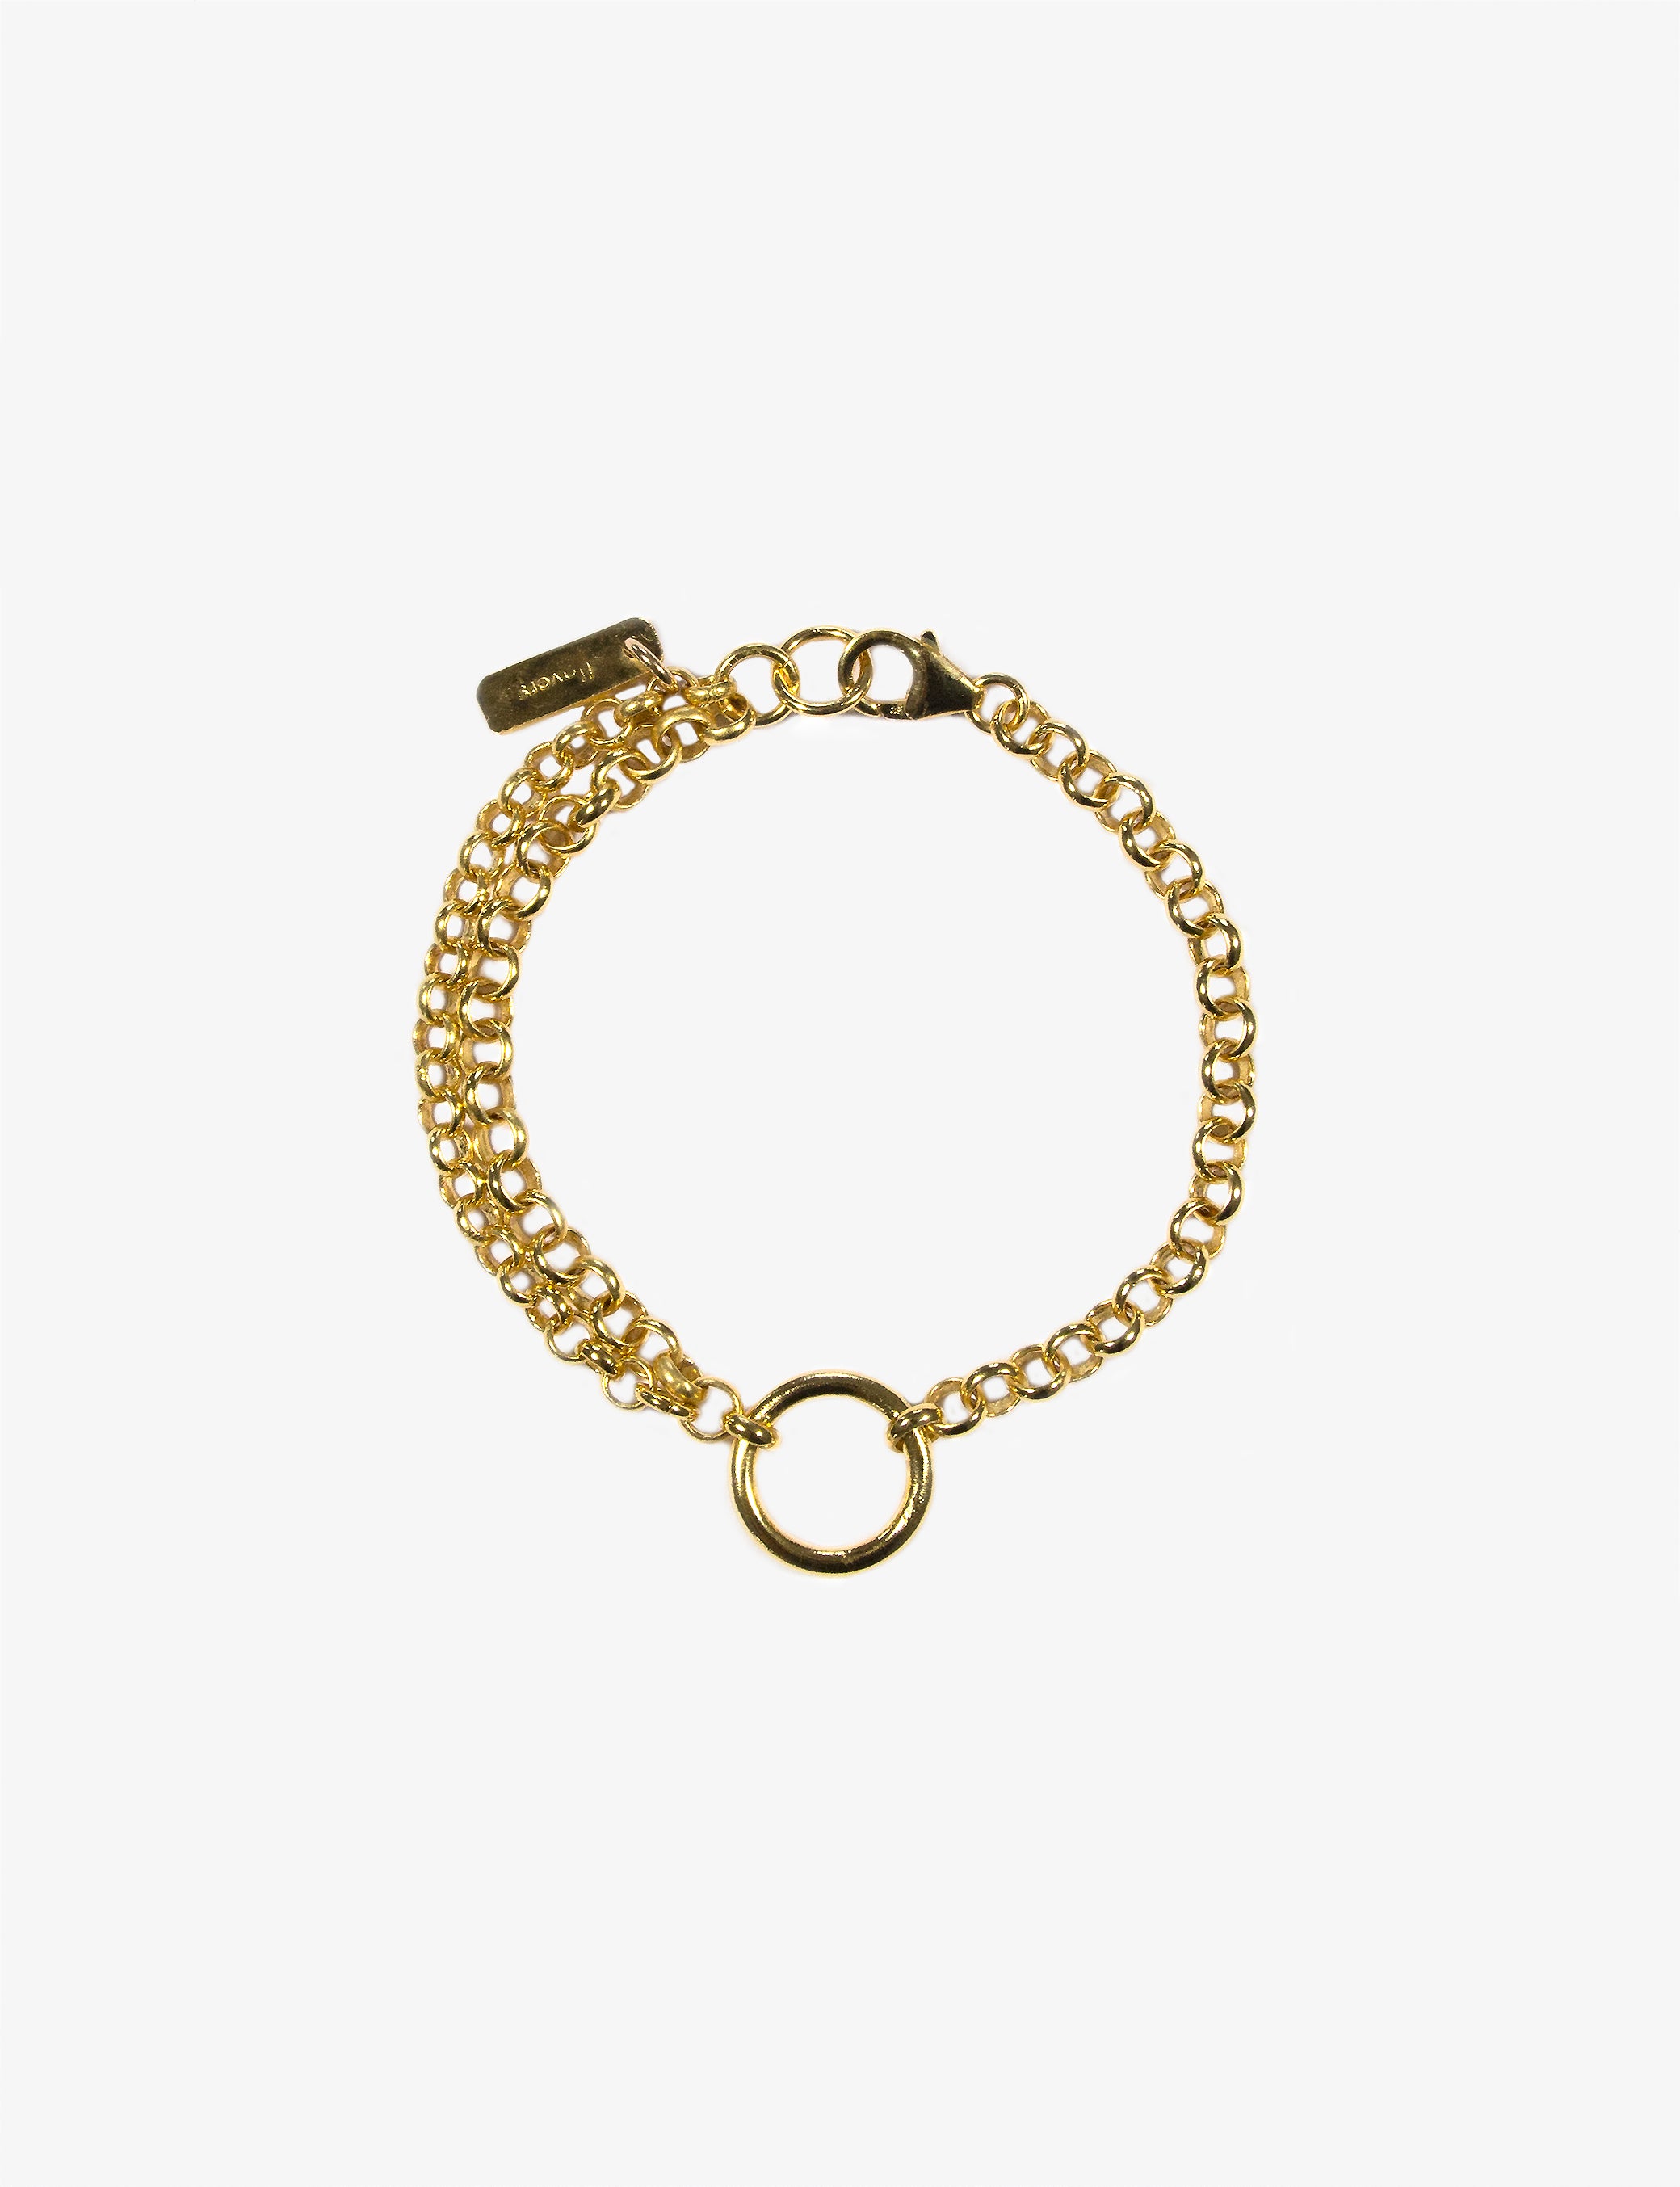 llayers refined jewelry Handmade men women gold chain bracelet with rings - Made In Brookyn New York 3